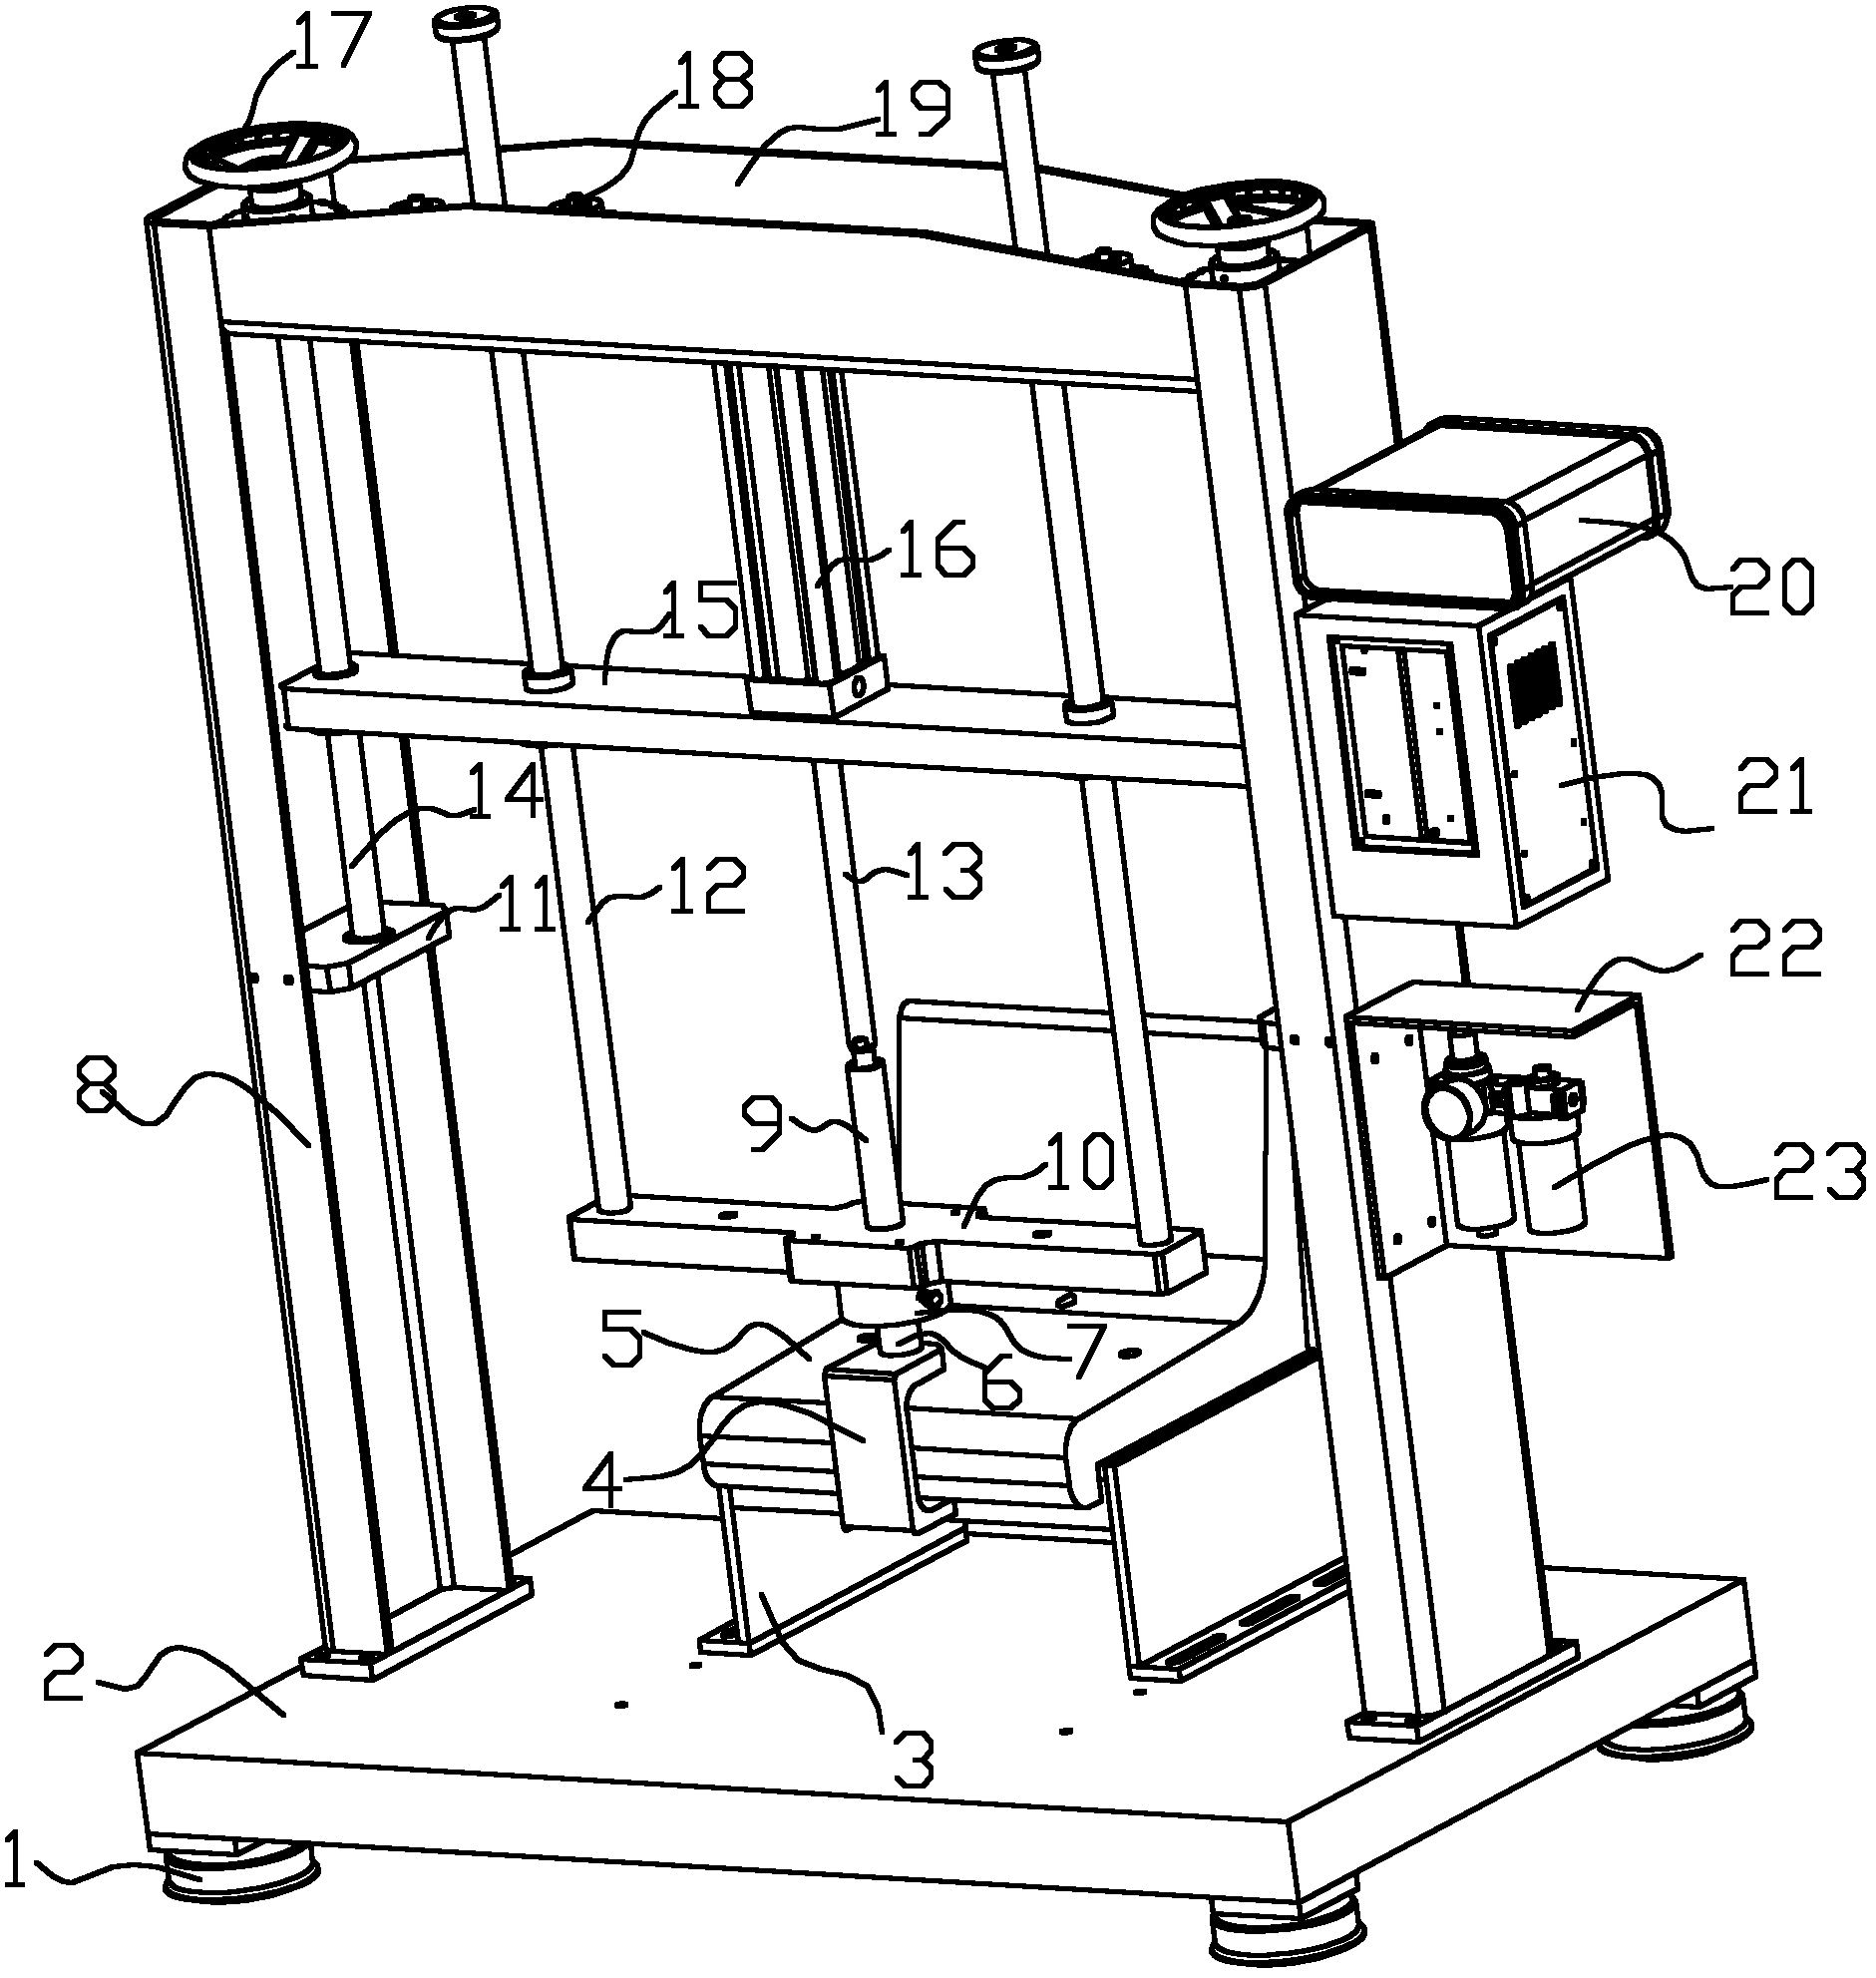 Vertical pulling-up test device and test method for chair